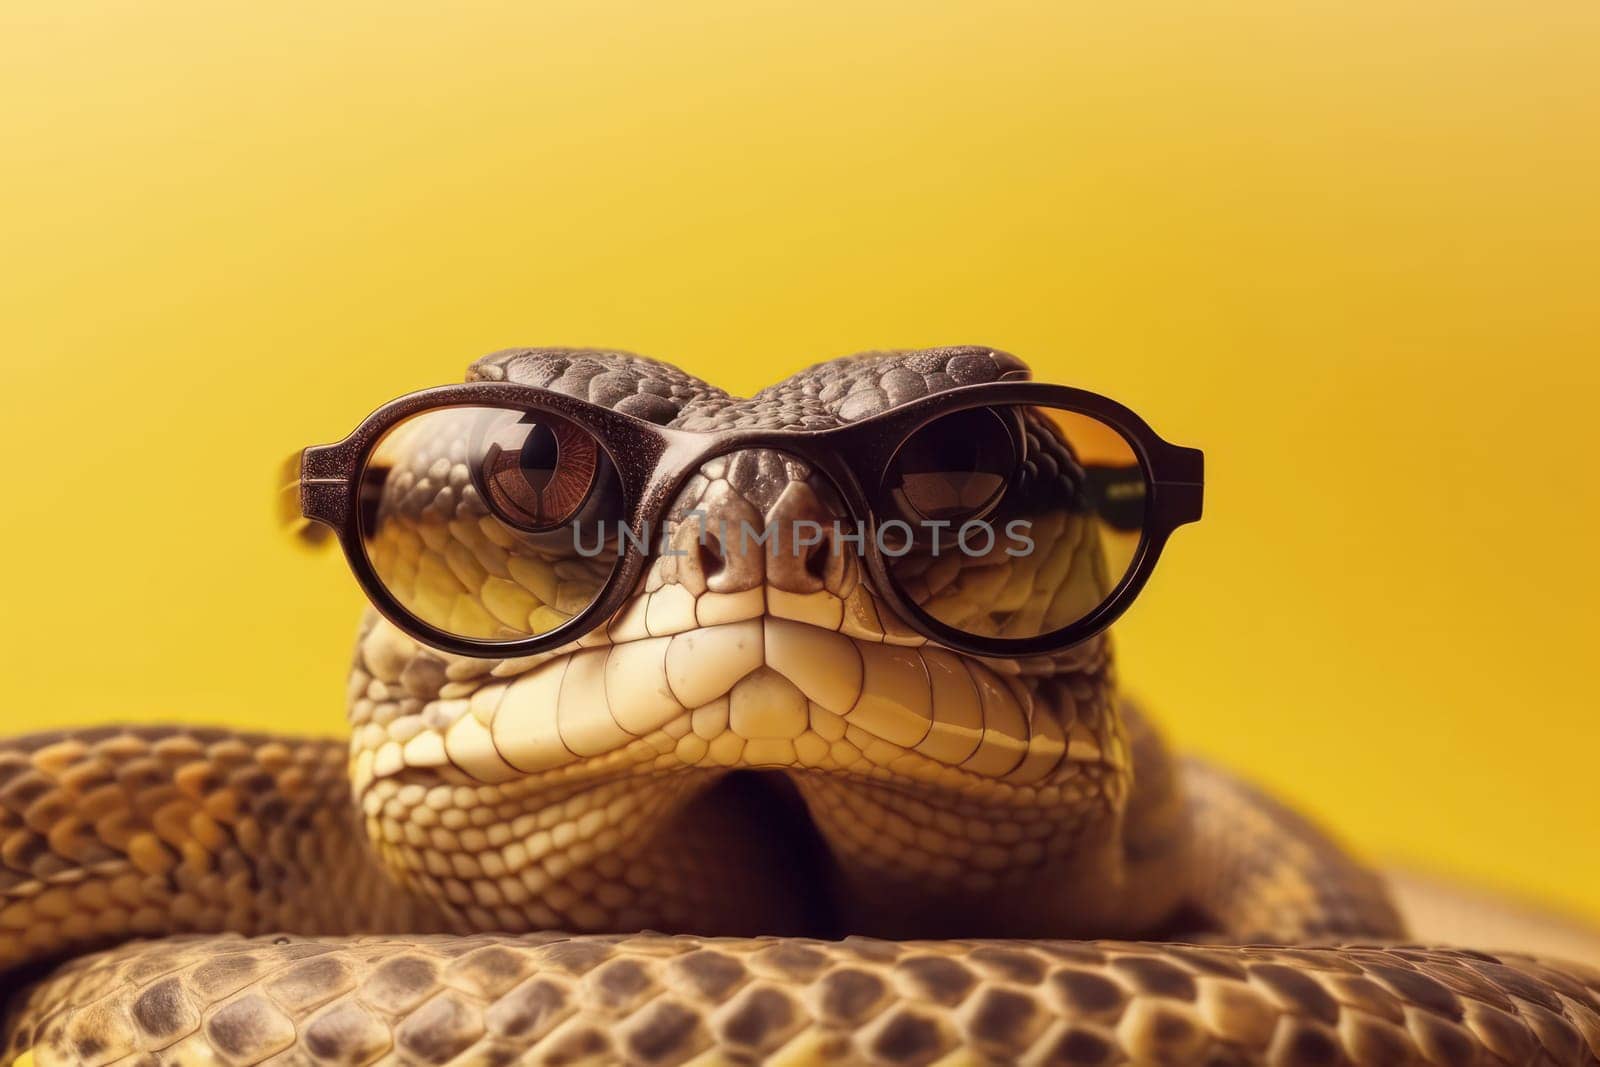 A wild and adventurous snake in shades, exploring the outdoors with its exotic beauty and charm by Sorapop